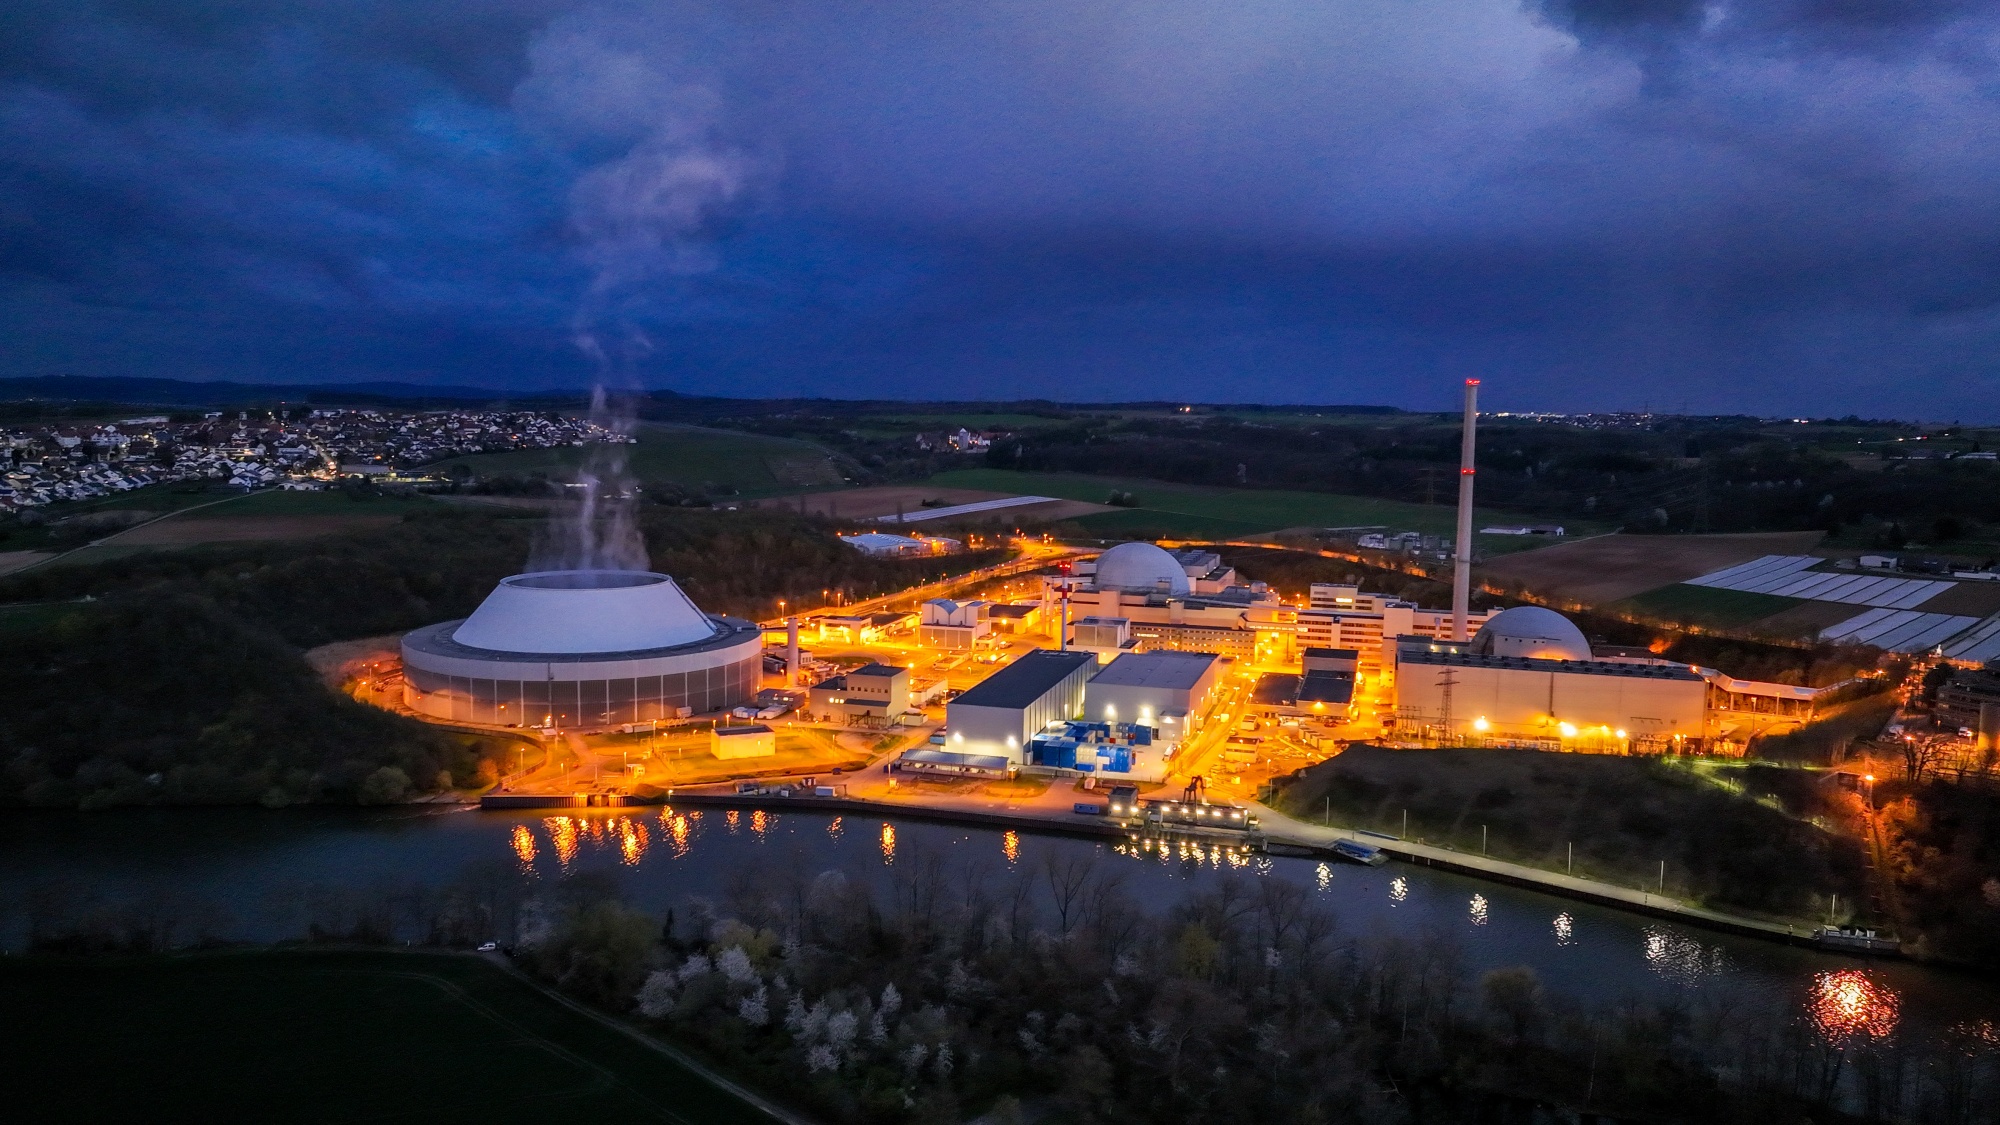 A Nuclear power station Germany.